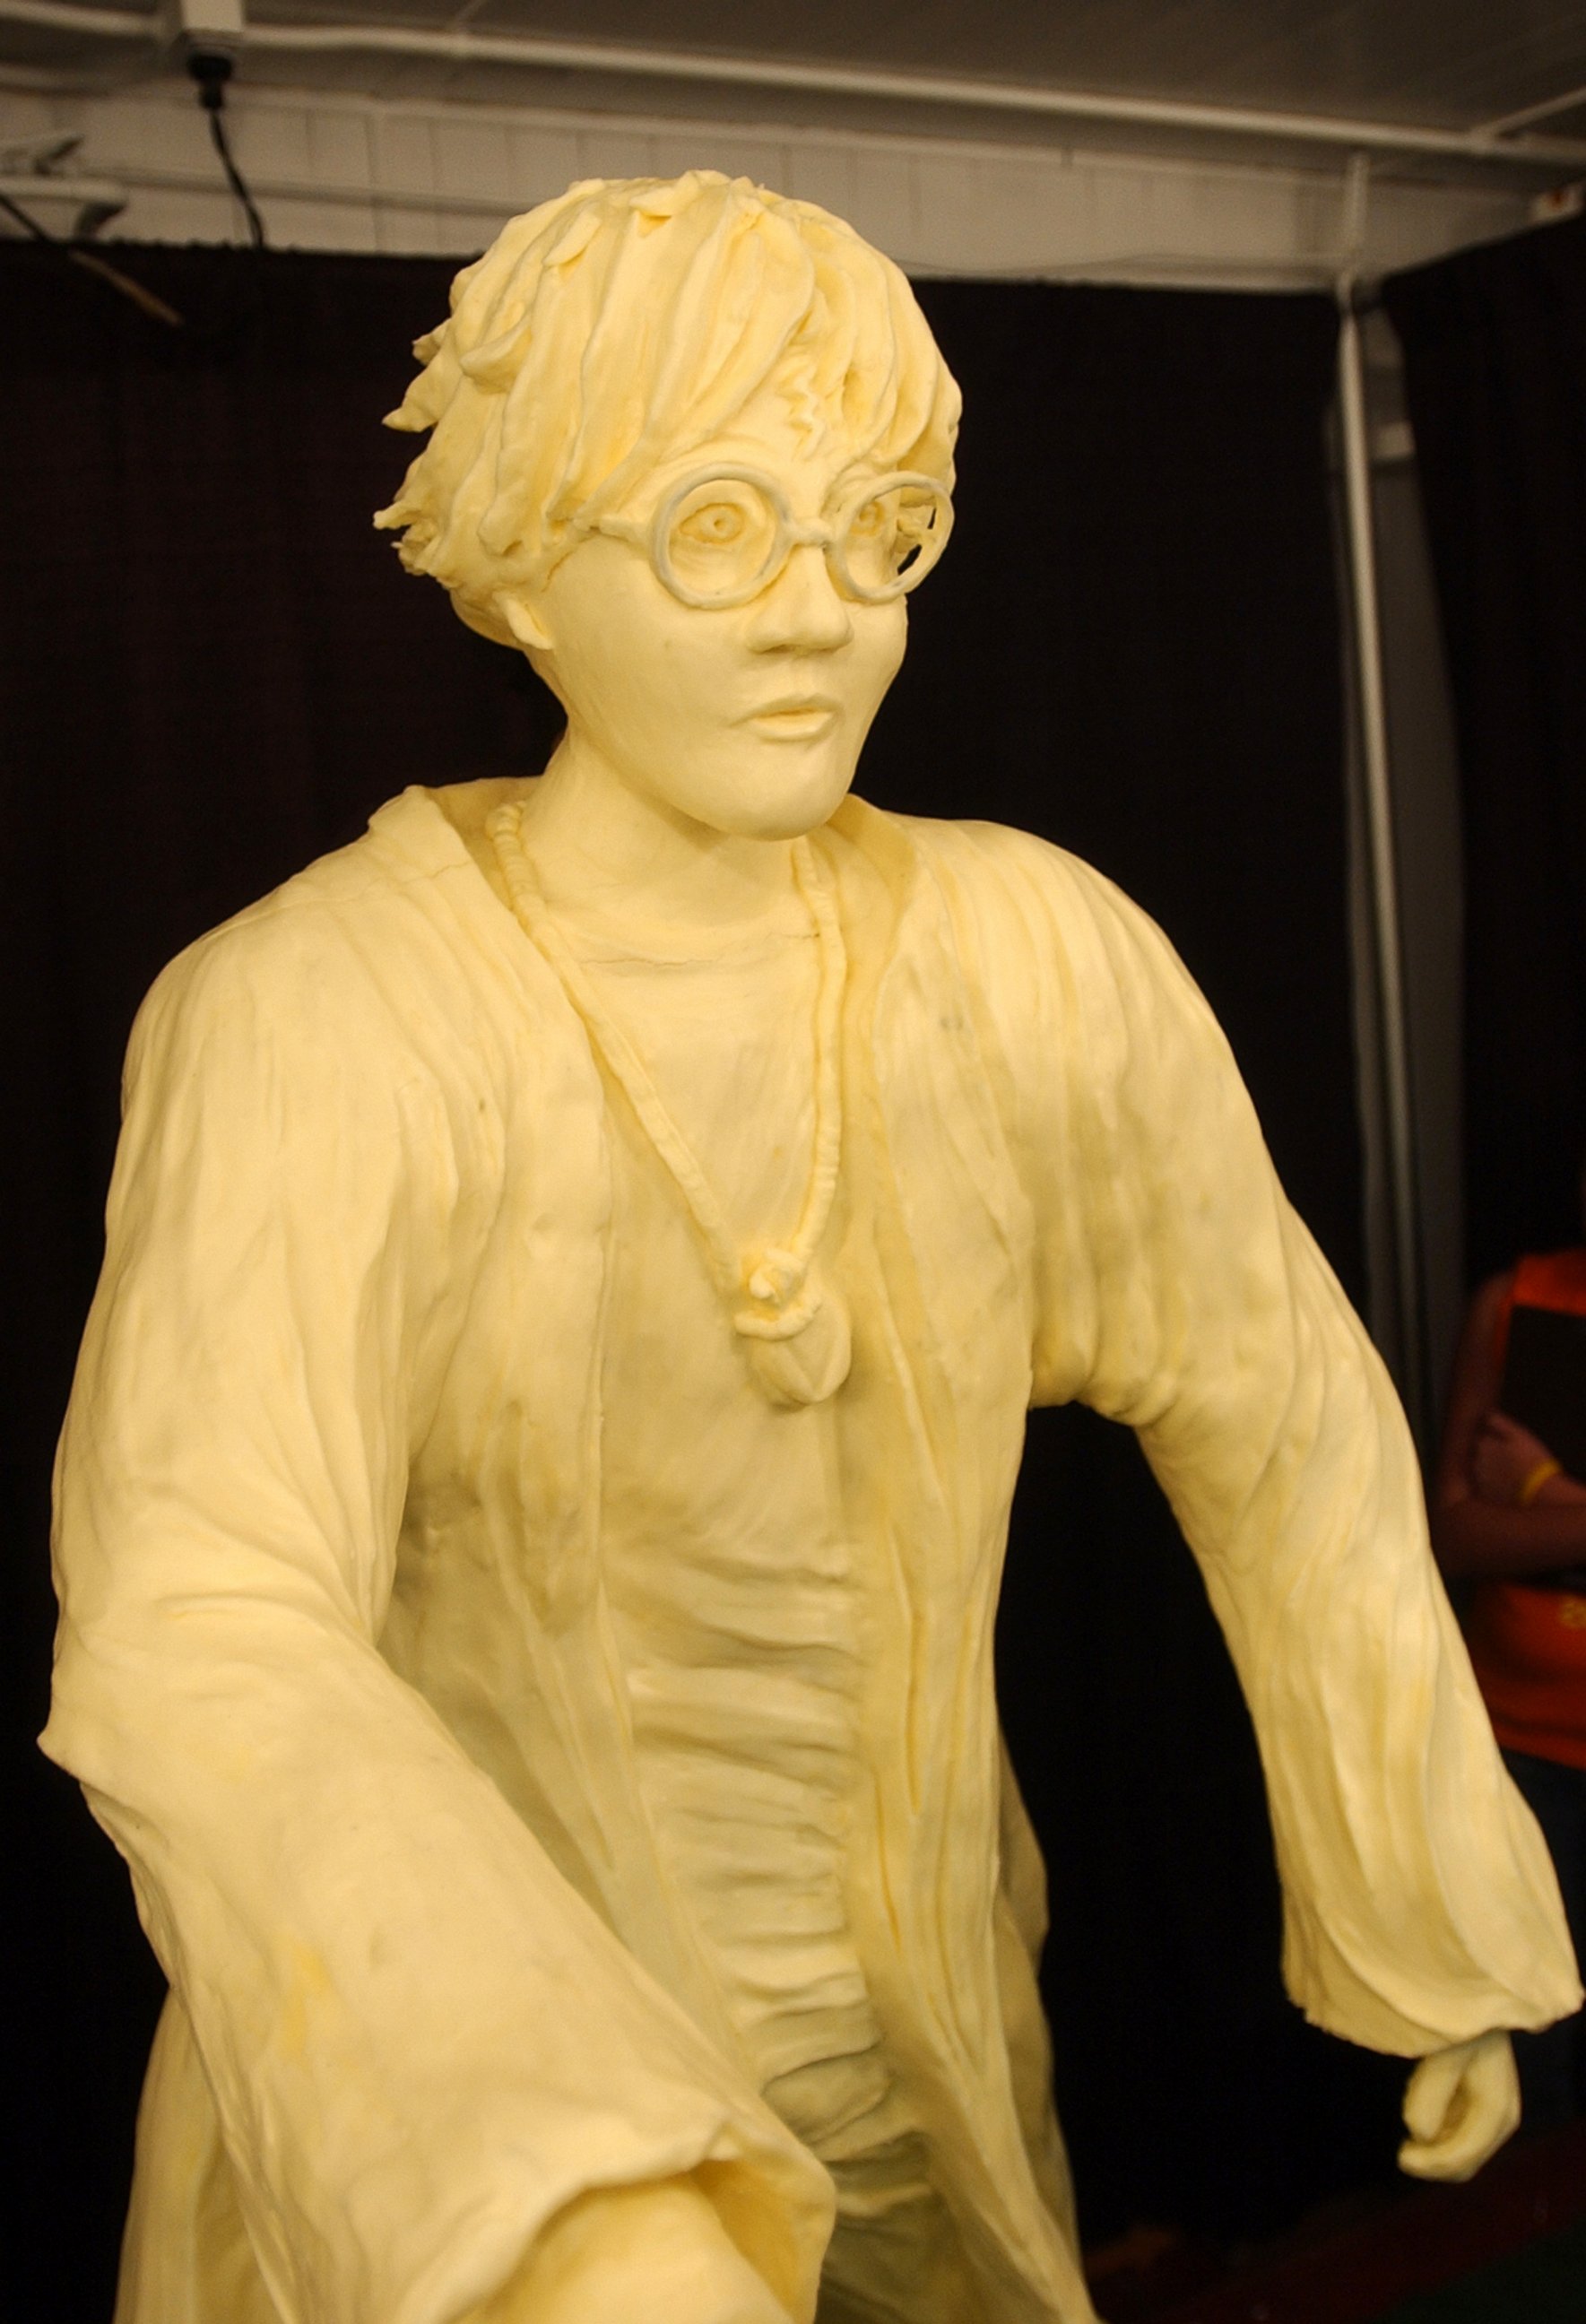 How One Becomes a Professional Butter Sculpture Artist - ABC News